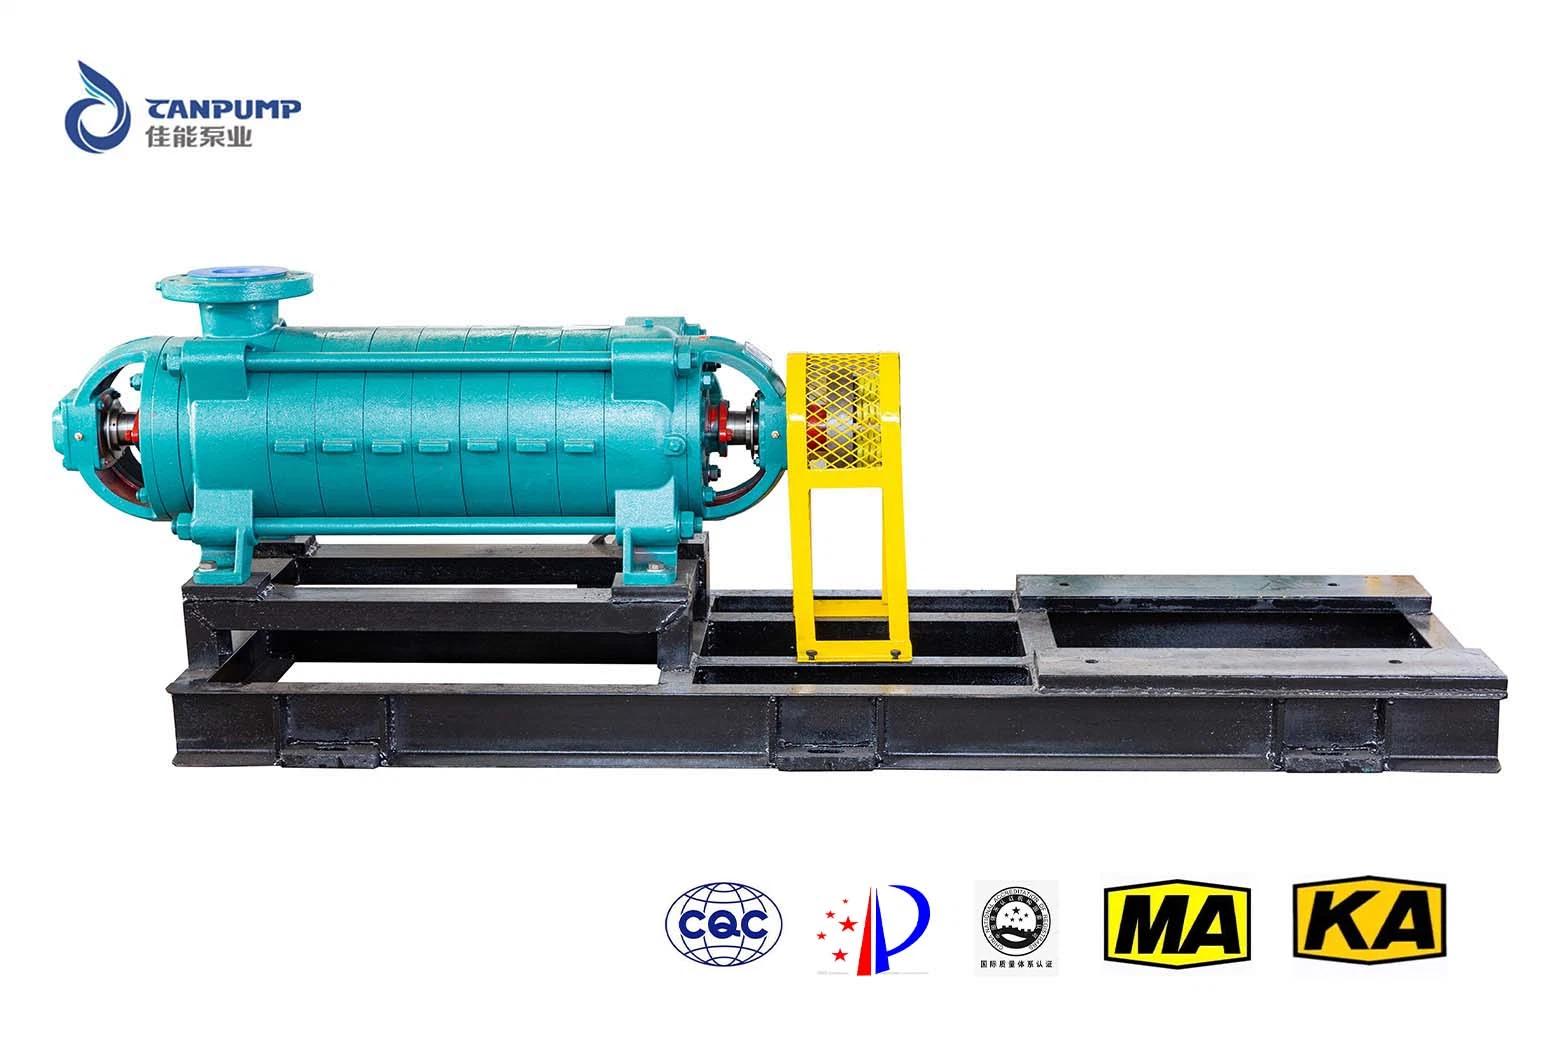 Factory Price Vertical Multistage Centrifugal Pump for Industrial Drain Contamination System MD125-25 (2-9 series)